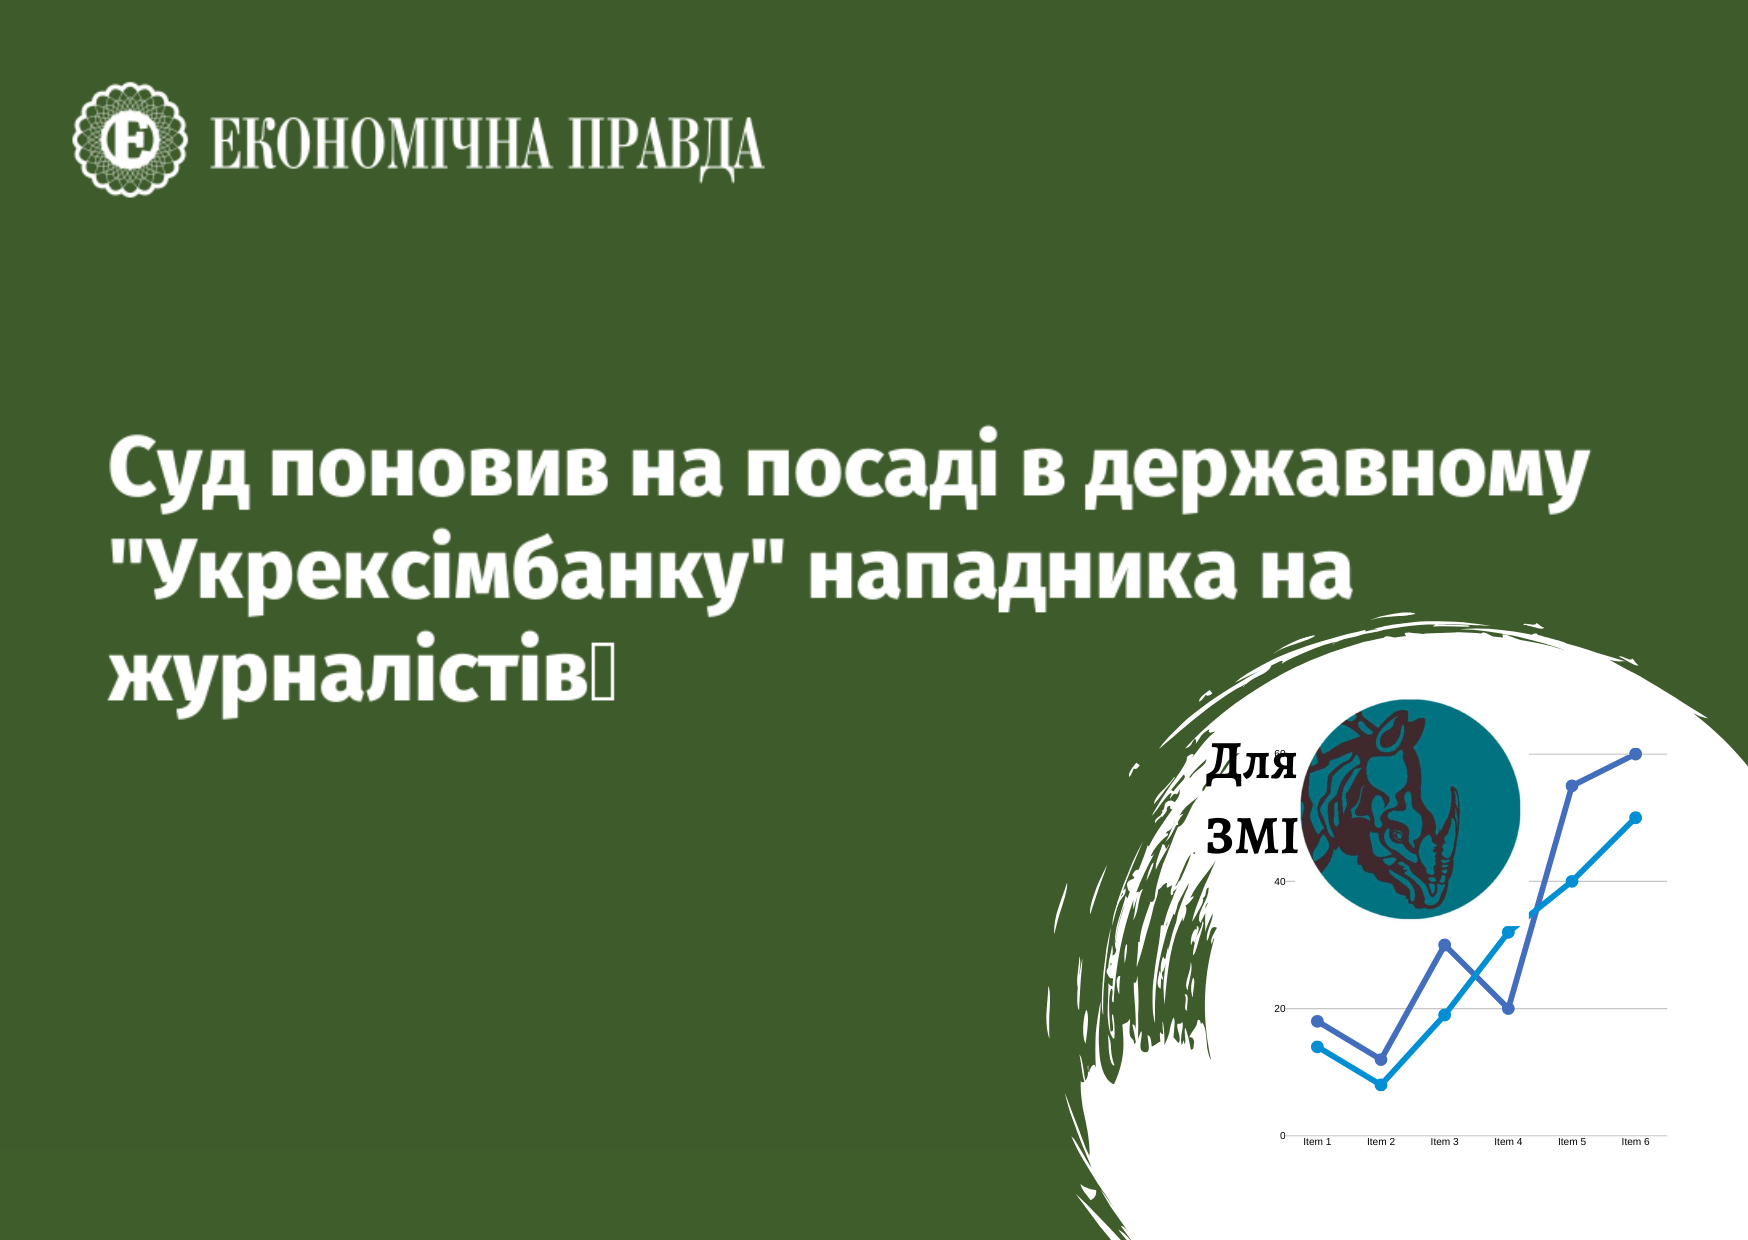 Ukreximbank won a lawsuit over the assets of a company close to the Russian oligarch Krupchak - data on the packaging market by Pro-Consulting. ECONOMICHNA PRAVDA